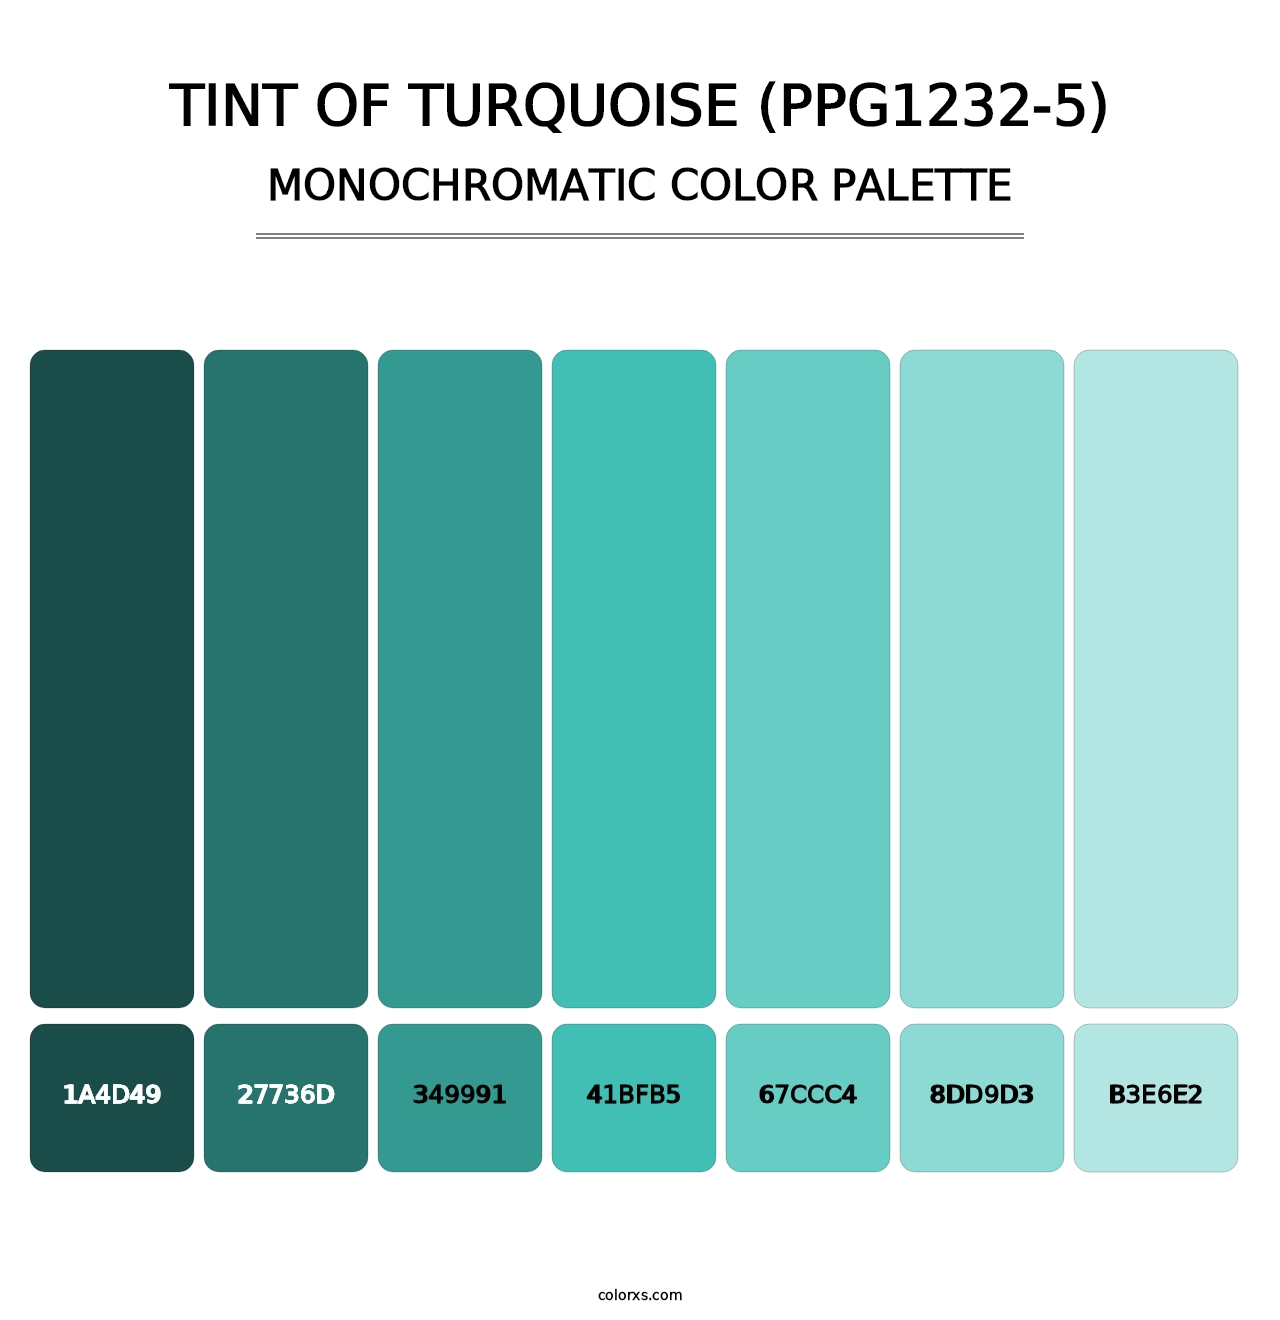 Tint Of Turquoise (PPG1232-5) - Monochromatic Color Palette